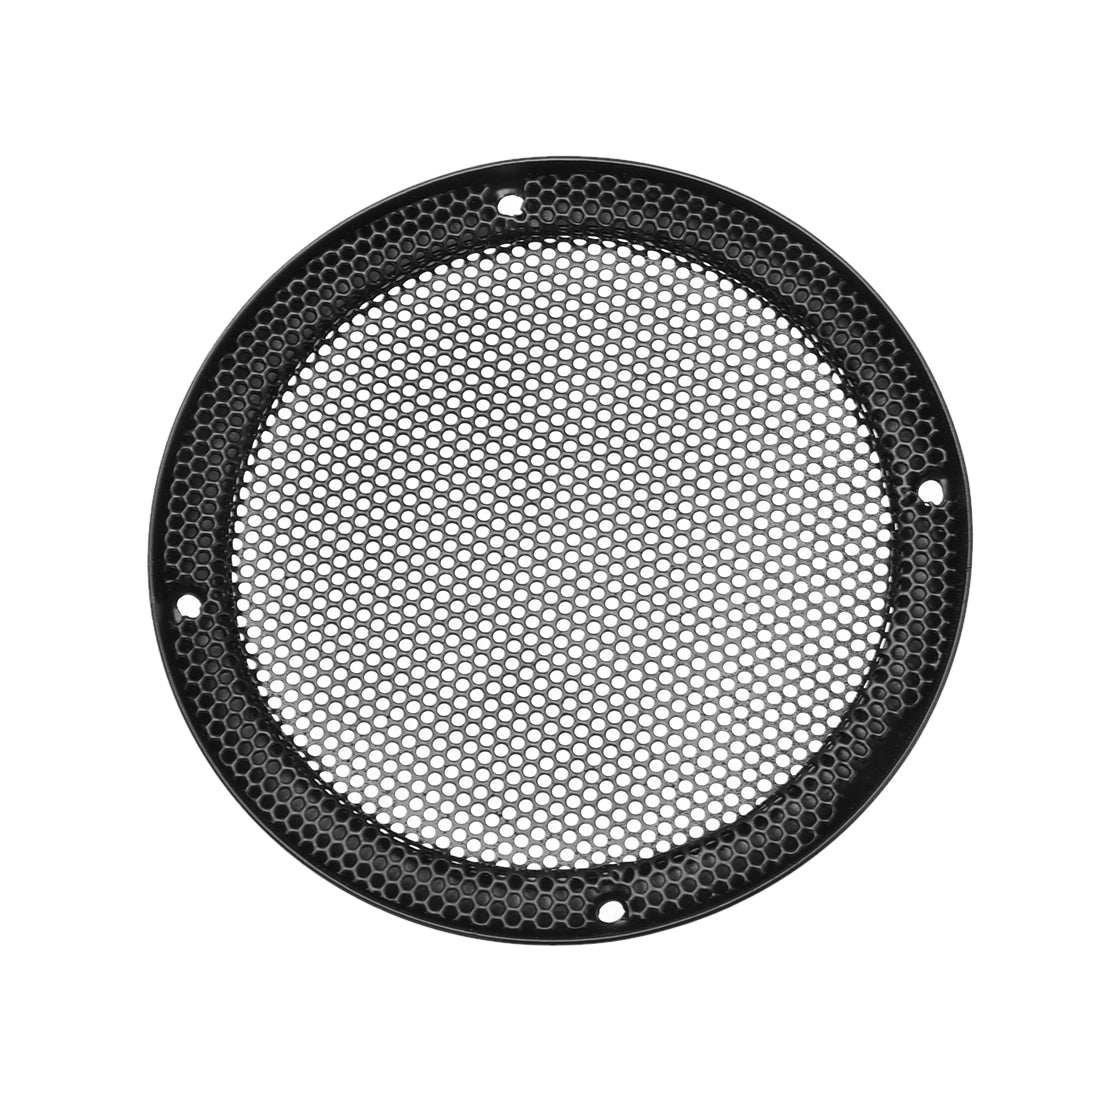 uxcell Uxcell Speaker Grill Cover 3.5 Inch 96.7mm Mesh Decorative Circle Subwoofer Guard Protector Black